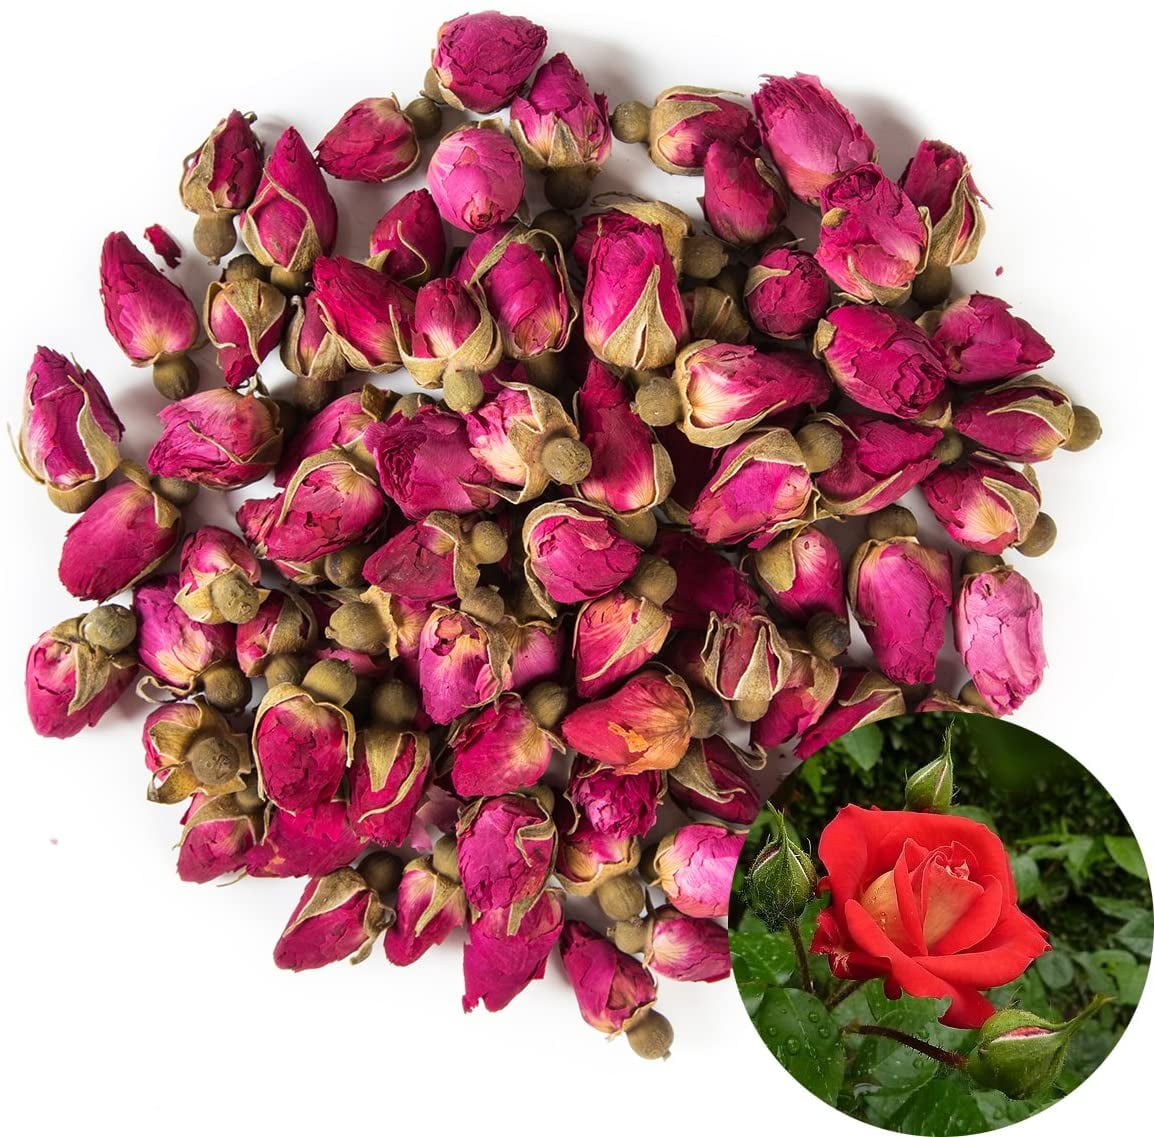 Cure Wid Pure Sun-Dried Rose Petals & Dried Rose Buds Whole in Resealable Pouch - Fragrant & Rich in Color,Ideal for Culinary & Aromatic Uses Food